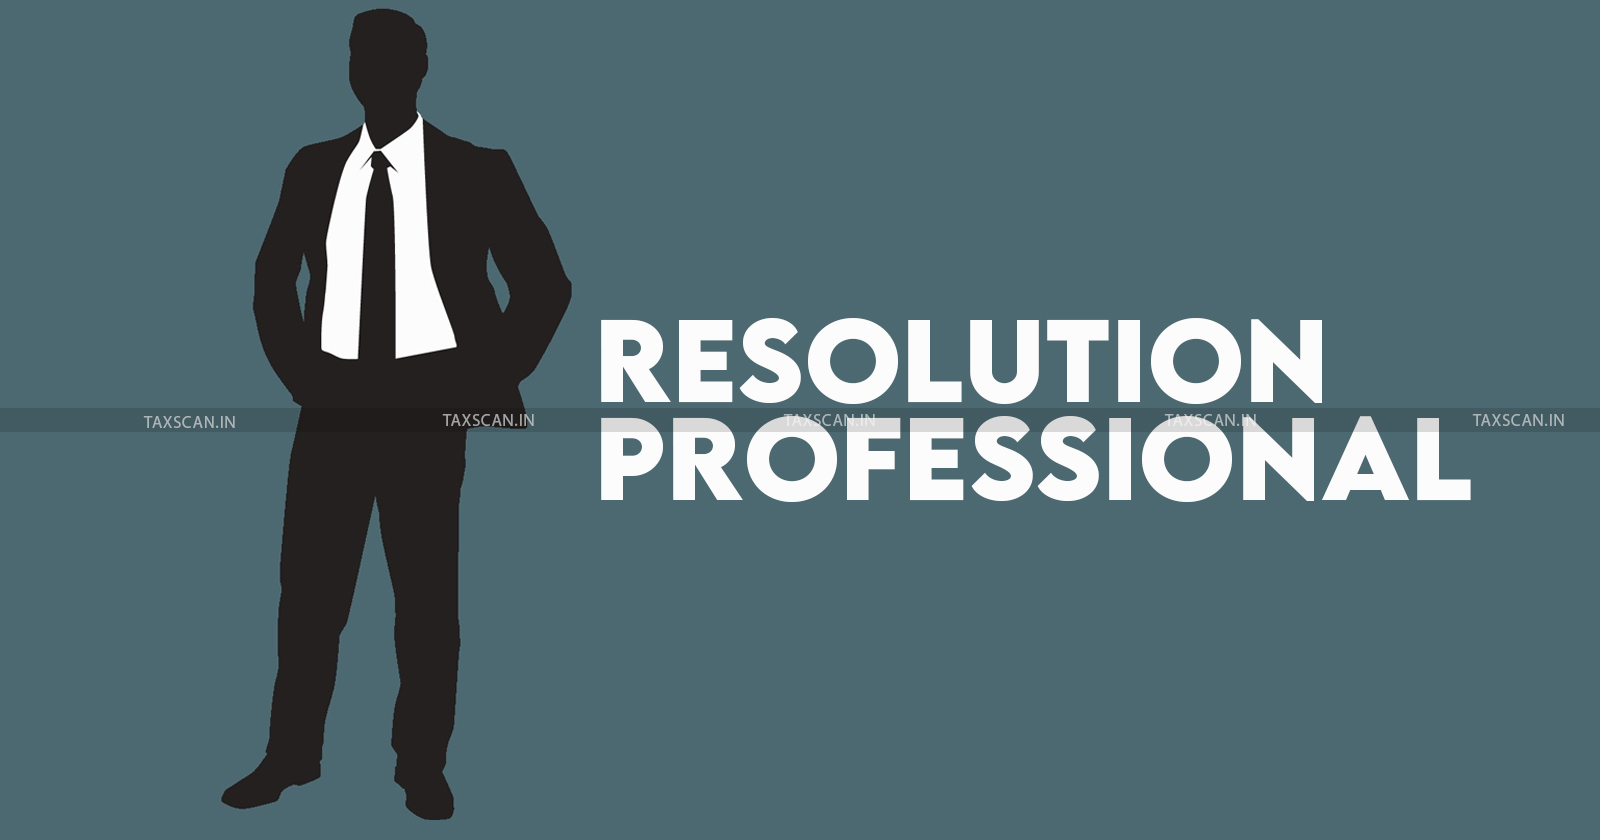 NCLT - NCLT Mumbai - Resolution Professional - Corporate Insolvency - taxscan